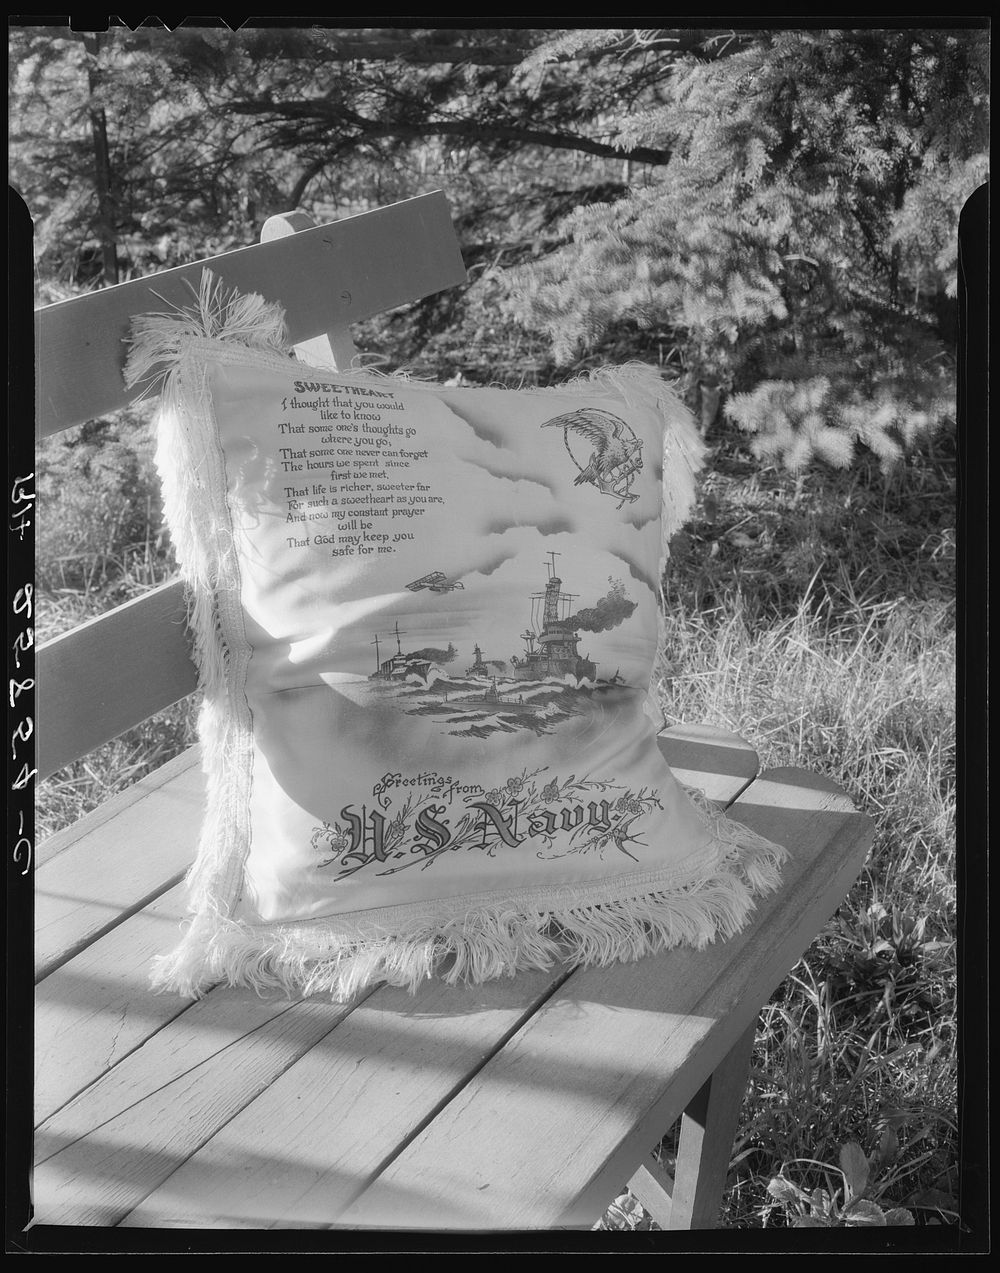 Souvenir pillow. Rockland, Maine. Sourced from the Library of Congress.